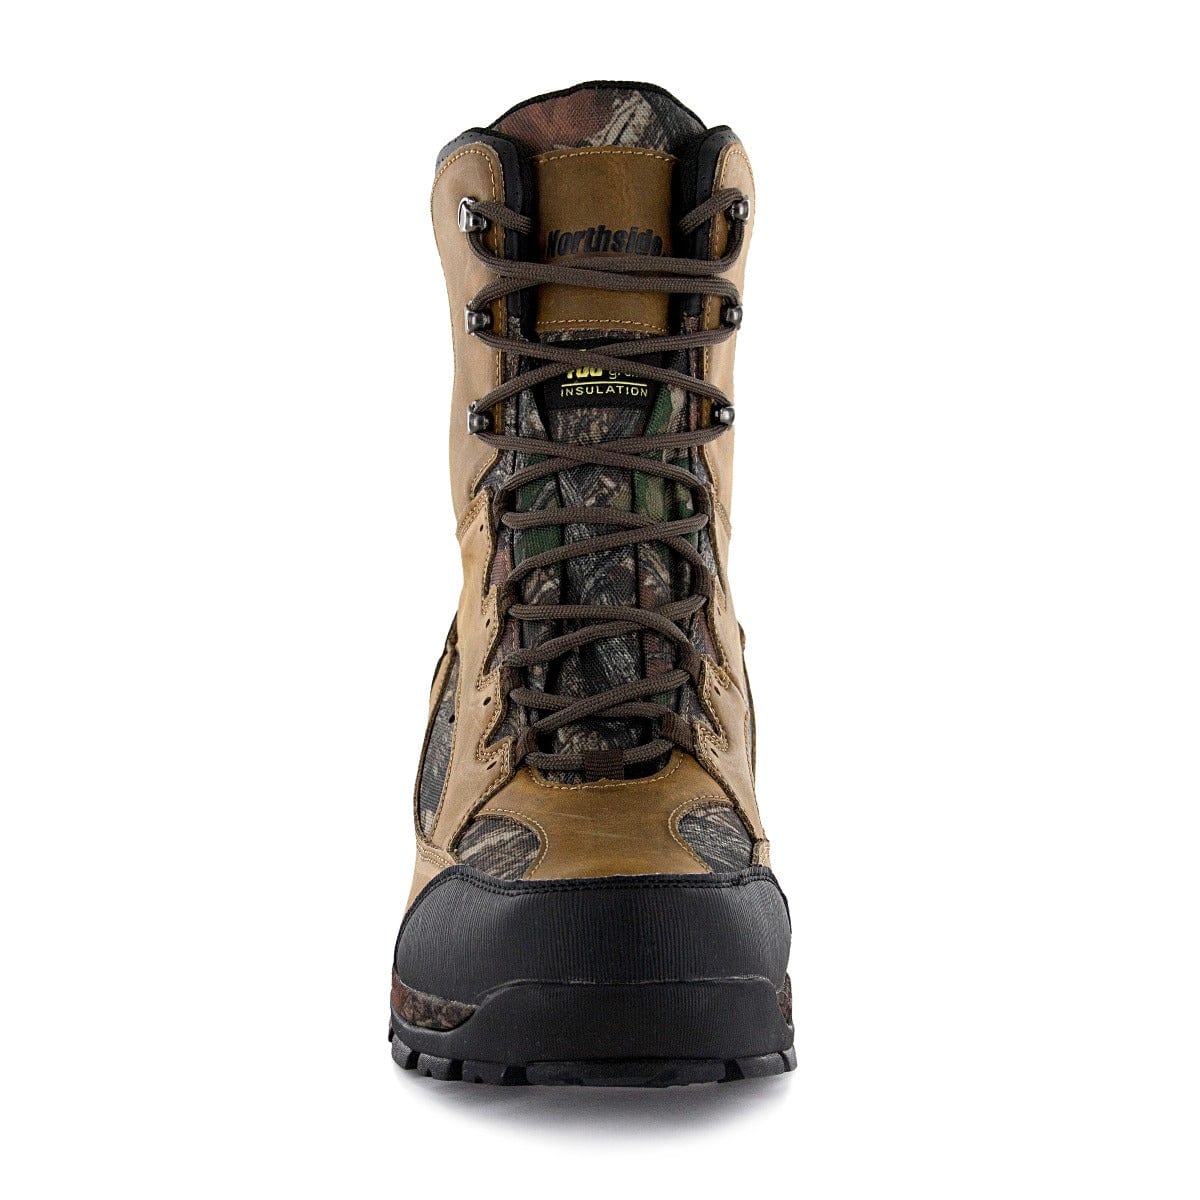 Mens Renegade 400 Insulated Waterproof Hunting Boot - Northside USA